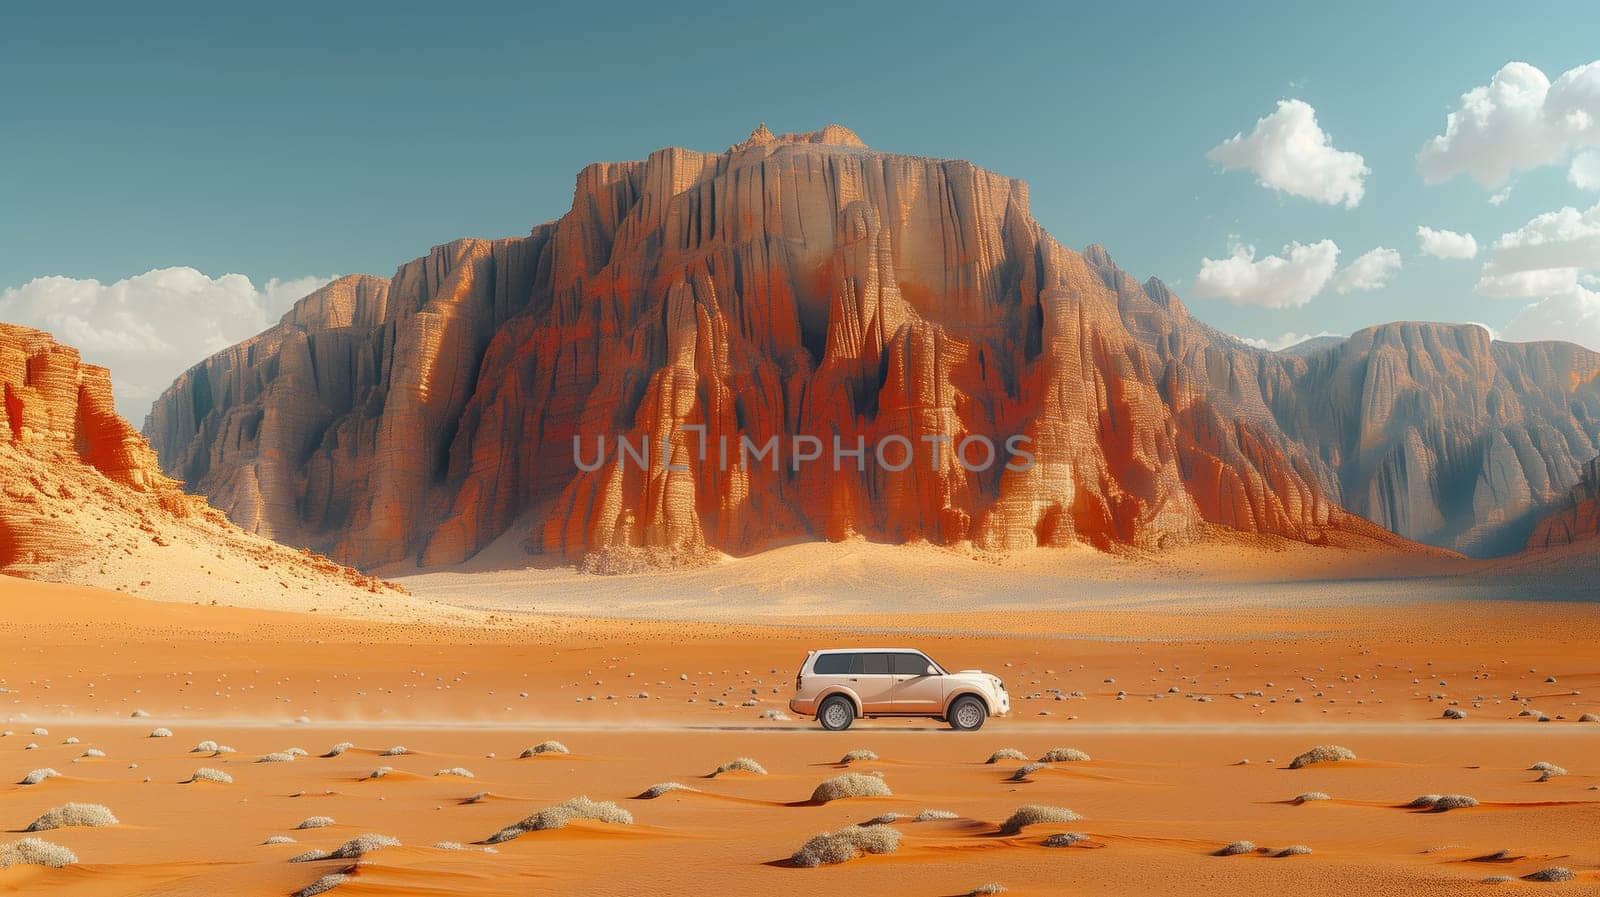 A white SUV is traversing a desert landscape with mountains in the background by richwolf